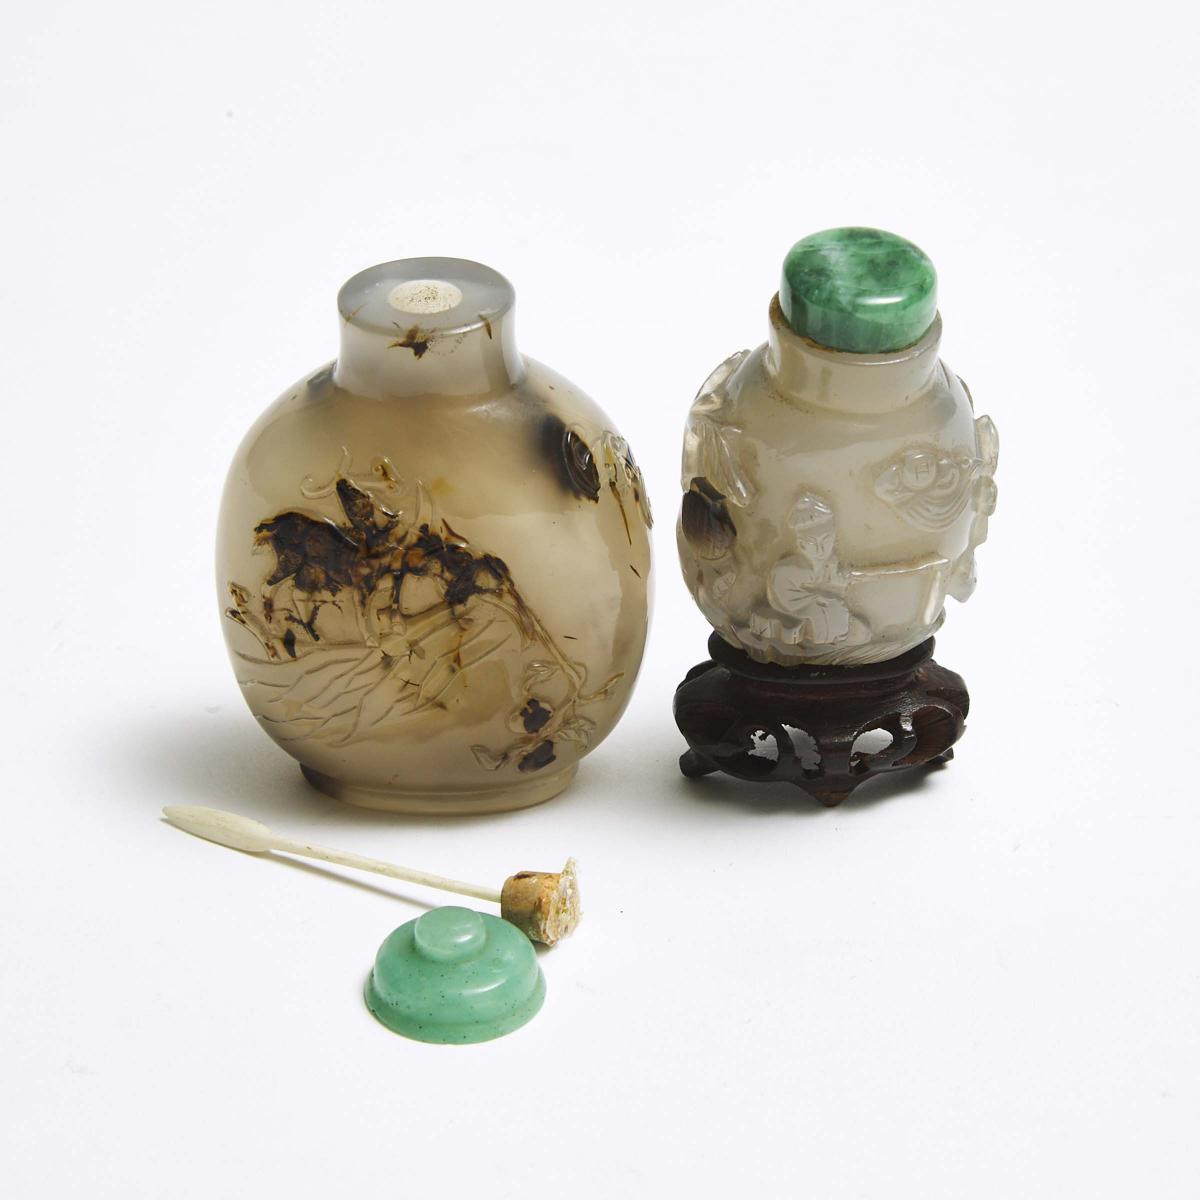 Two Well-Carved Agate Snuff Bottles, Qing Dynasty, 清 玛瑙巧雕鼻烟壶两只, tallest height 3 in — 7.5 cm (2 Piec - Image 3 of 4